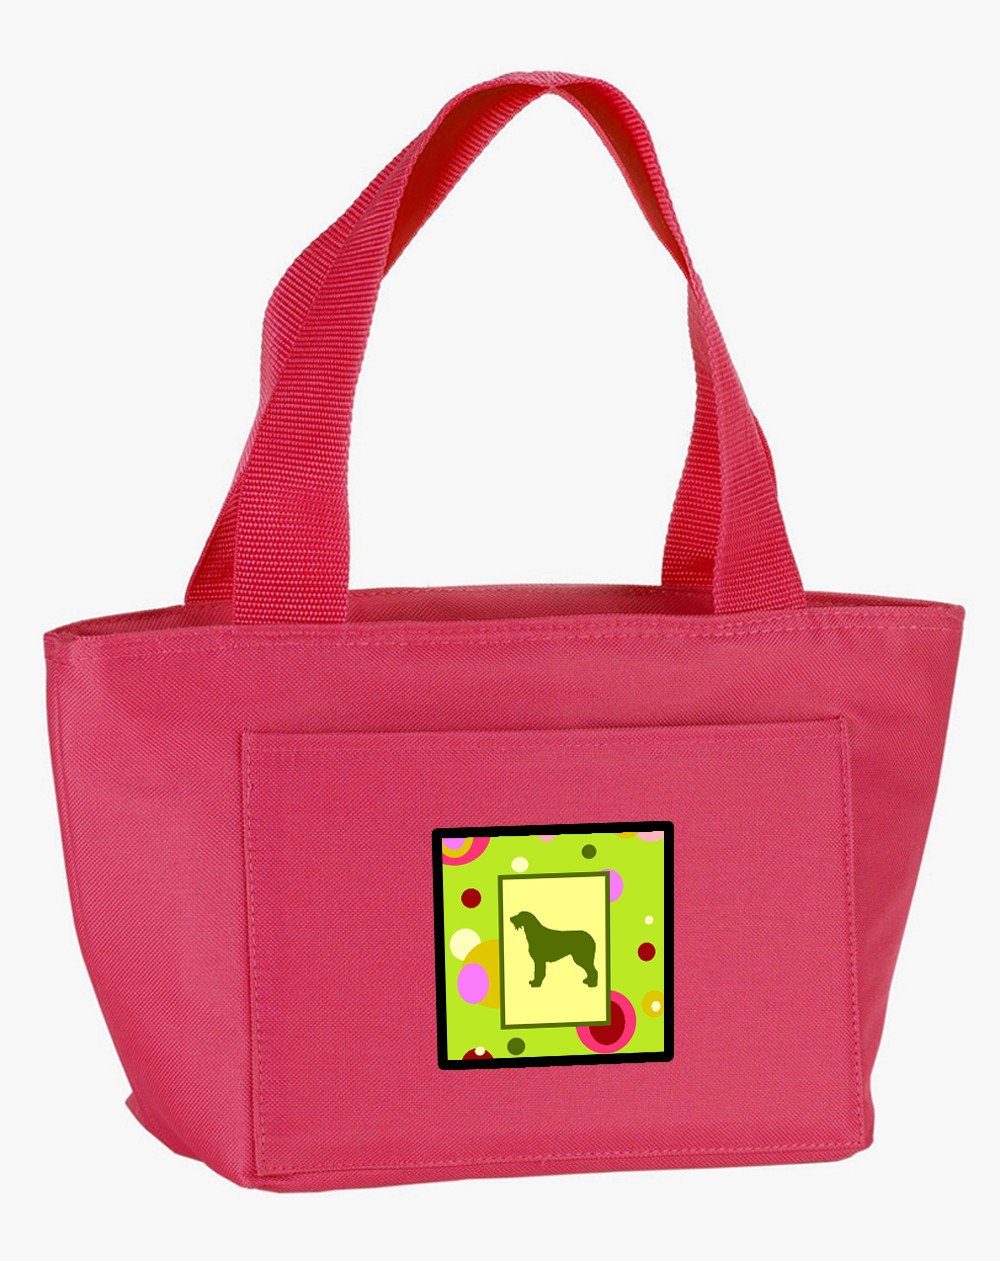 Lime Green Dots Irish Wolfhound Lunch Bag CK1135PK-8808 by Caroline's Treasures